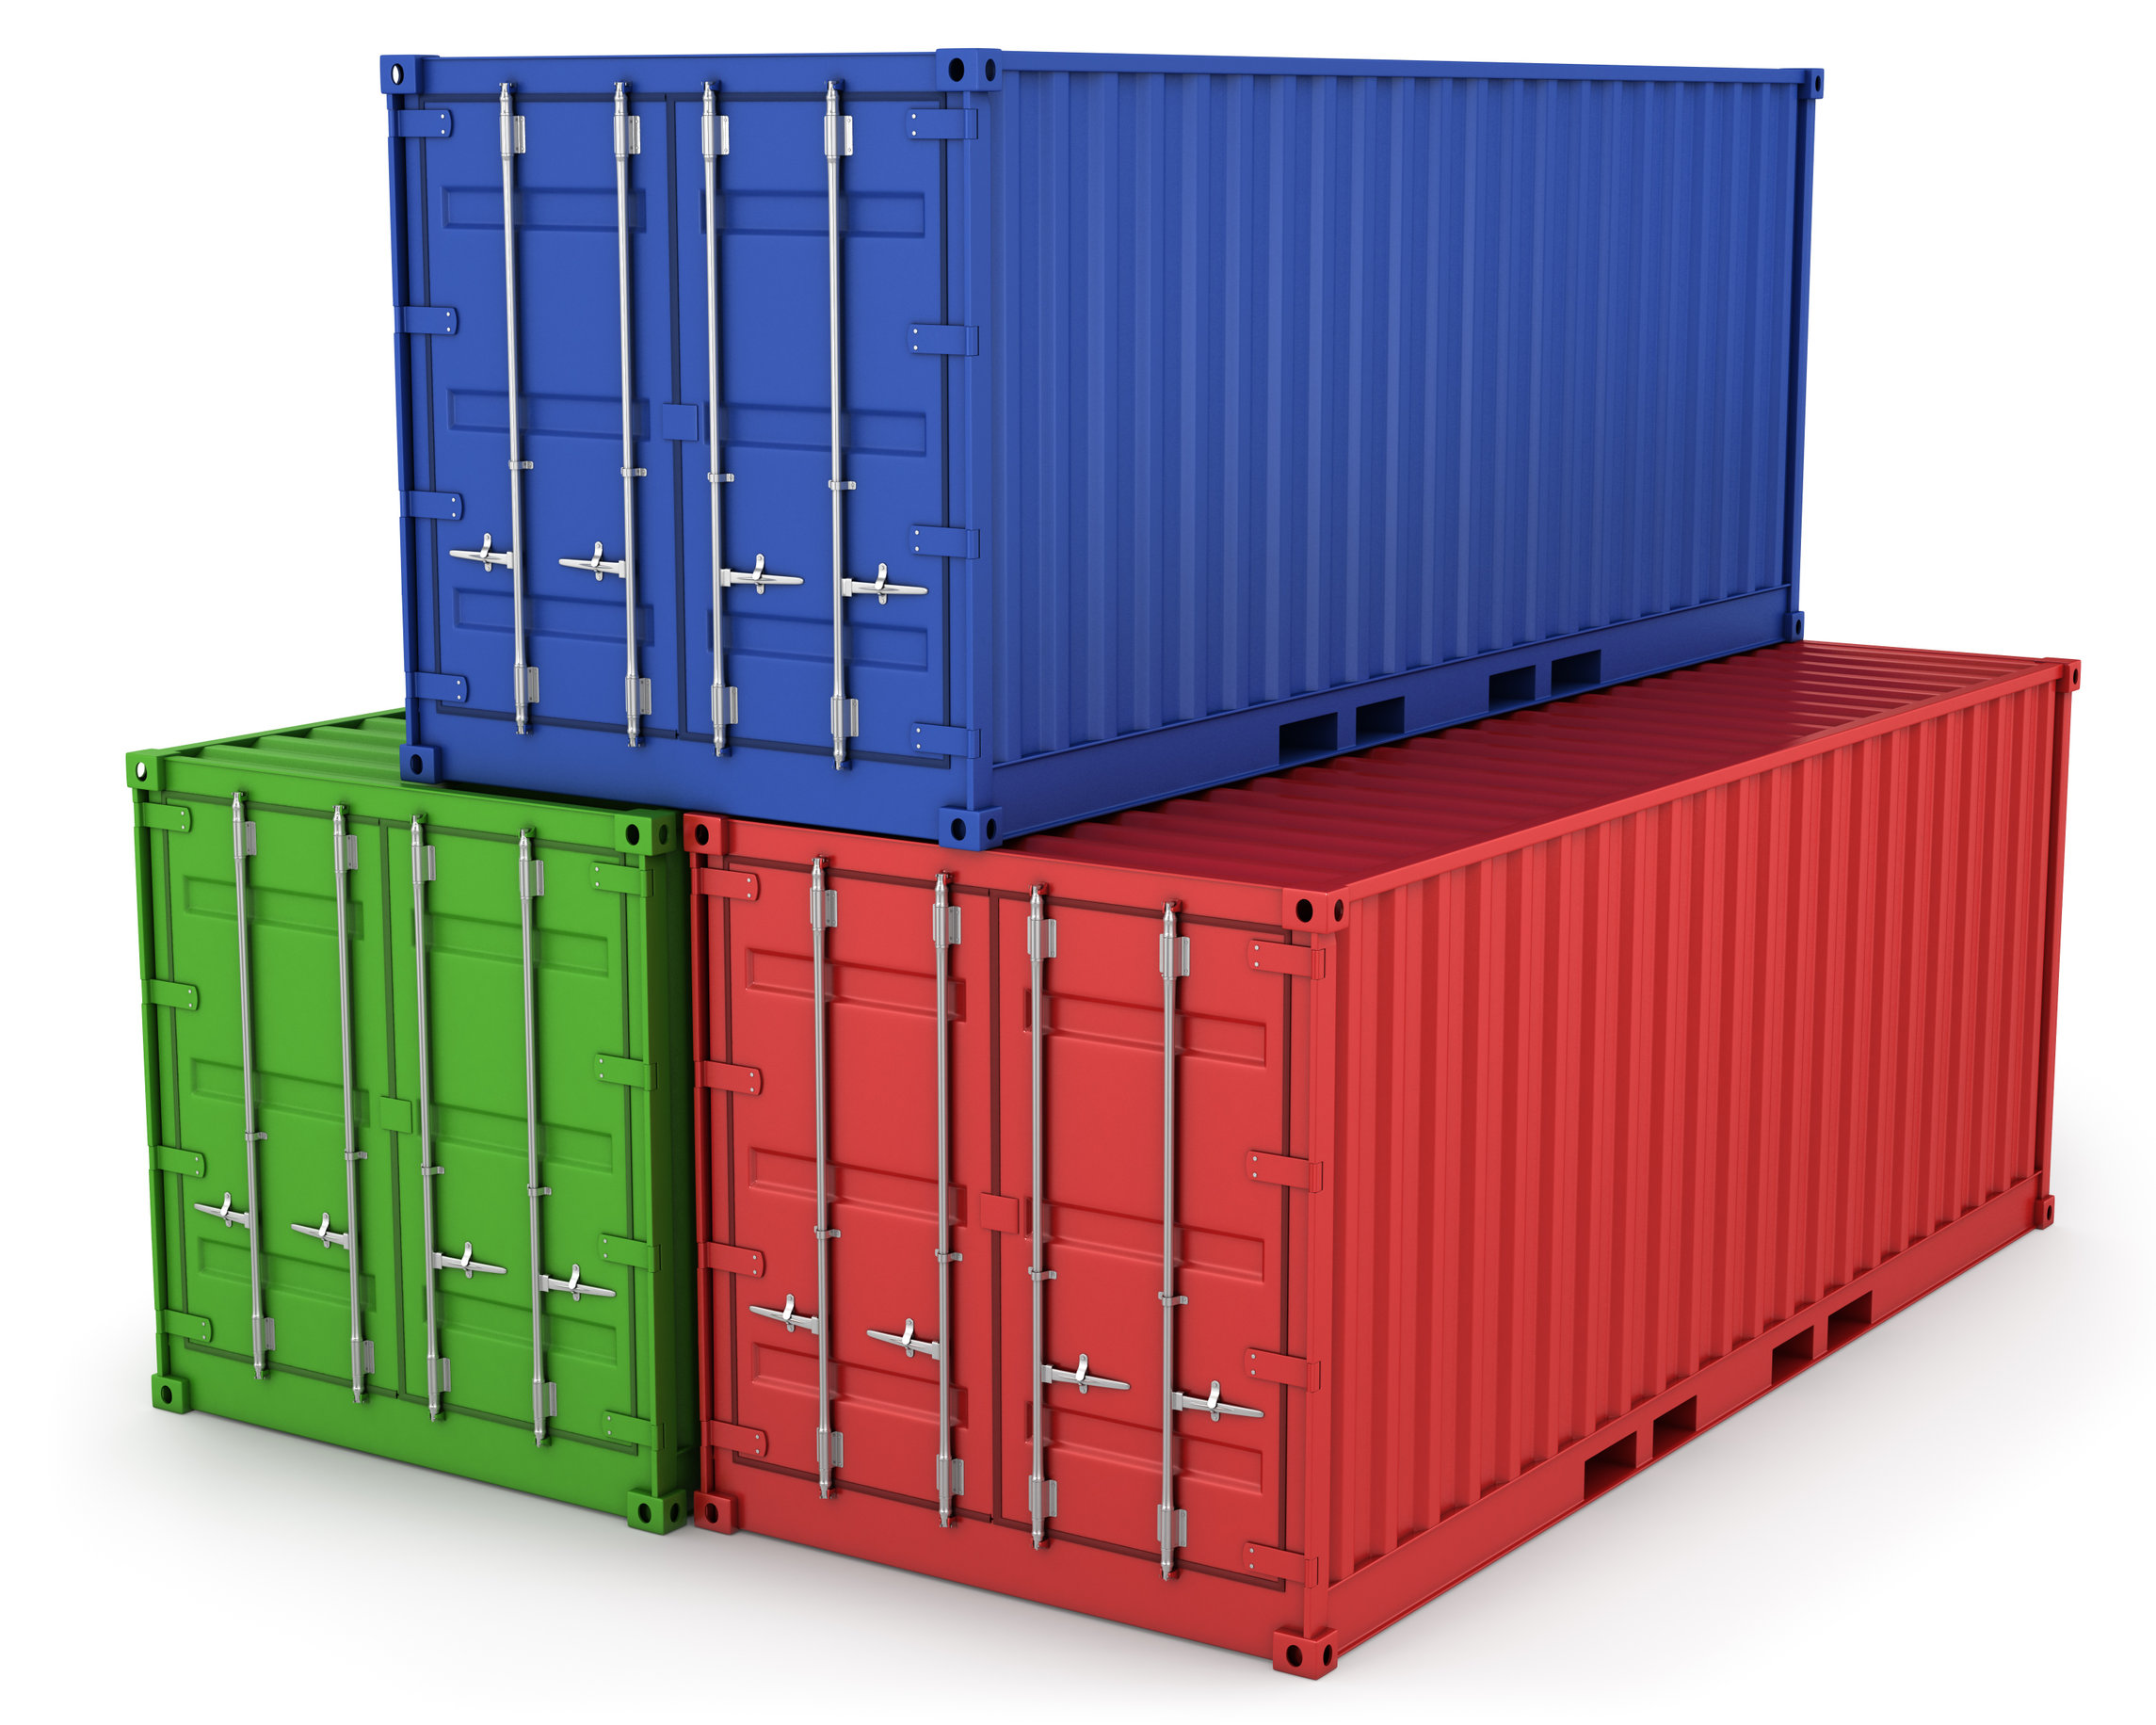 Why are Storage Containers Better than Warehousing?